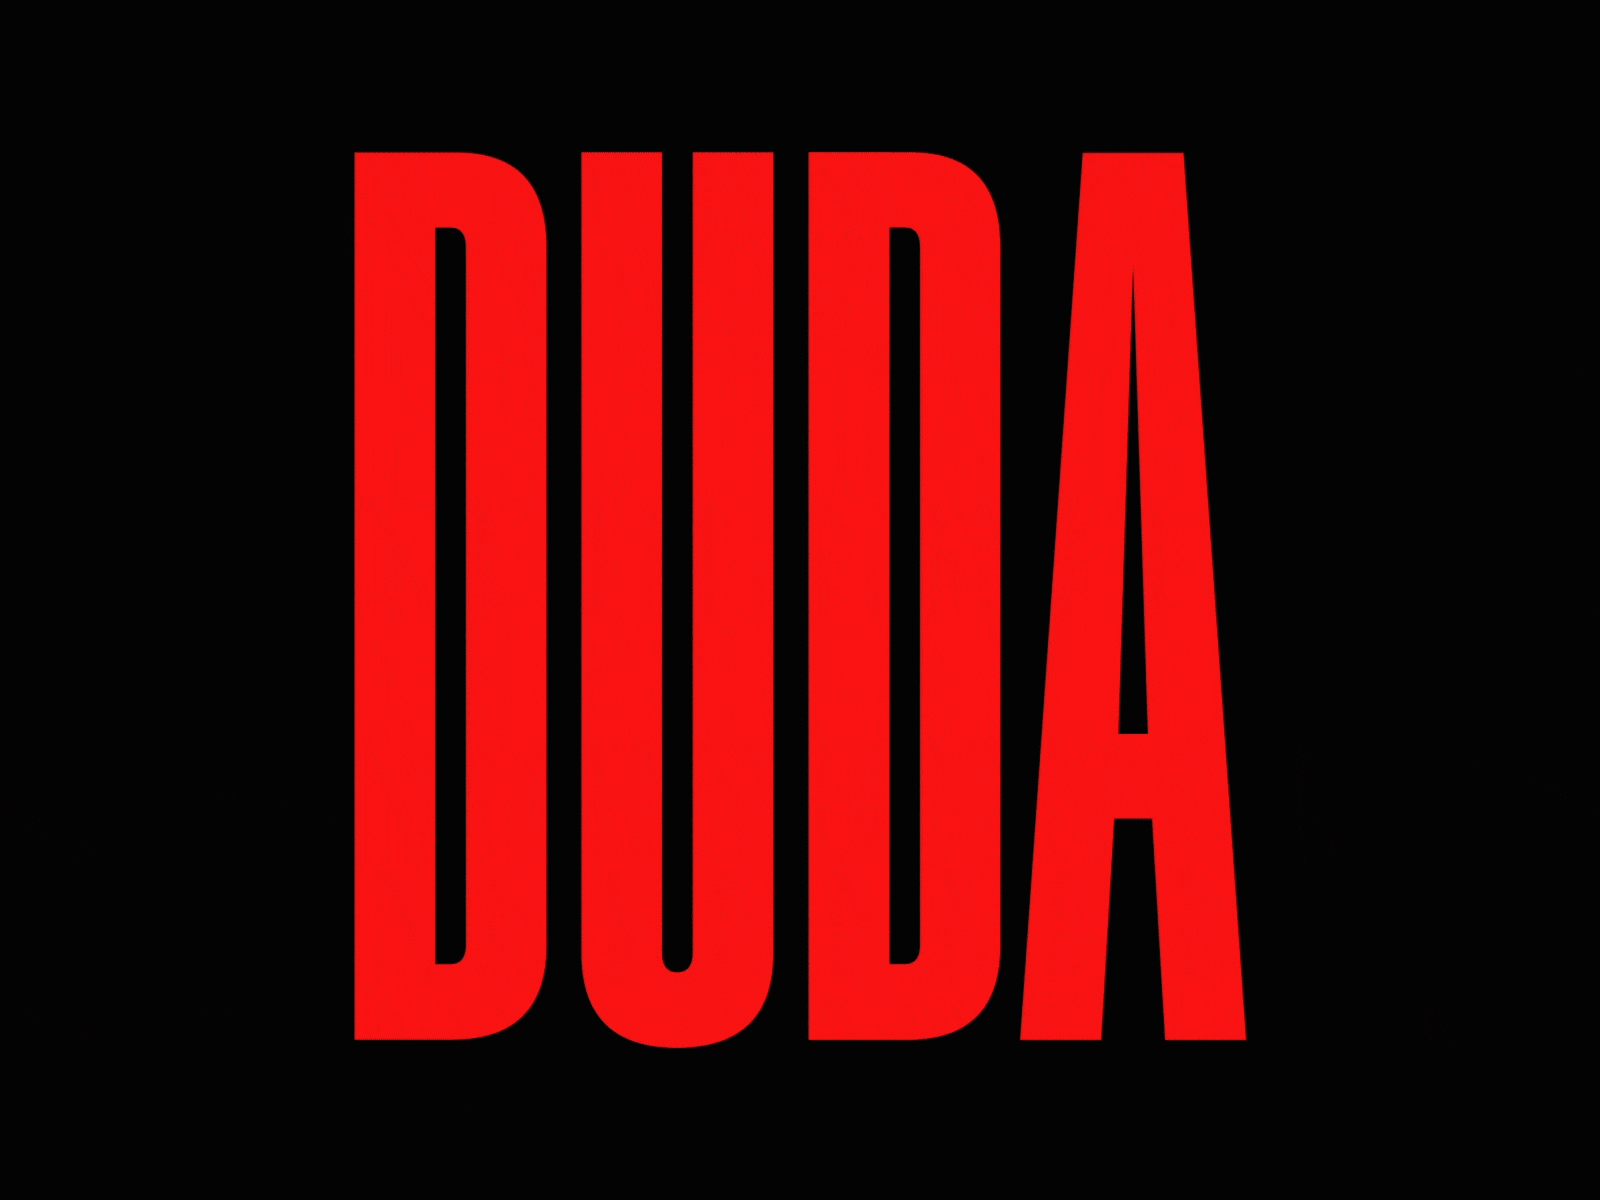 Duda ↔ Dupa animation animation 2d animation after effects ass duda dupa elections graphic design poland presidential election type type animation typographic typography typography animation